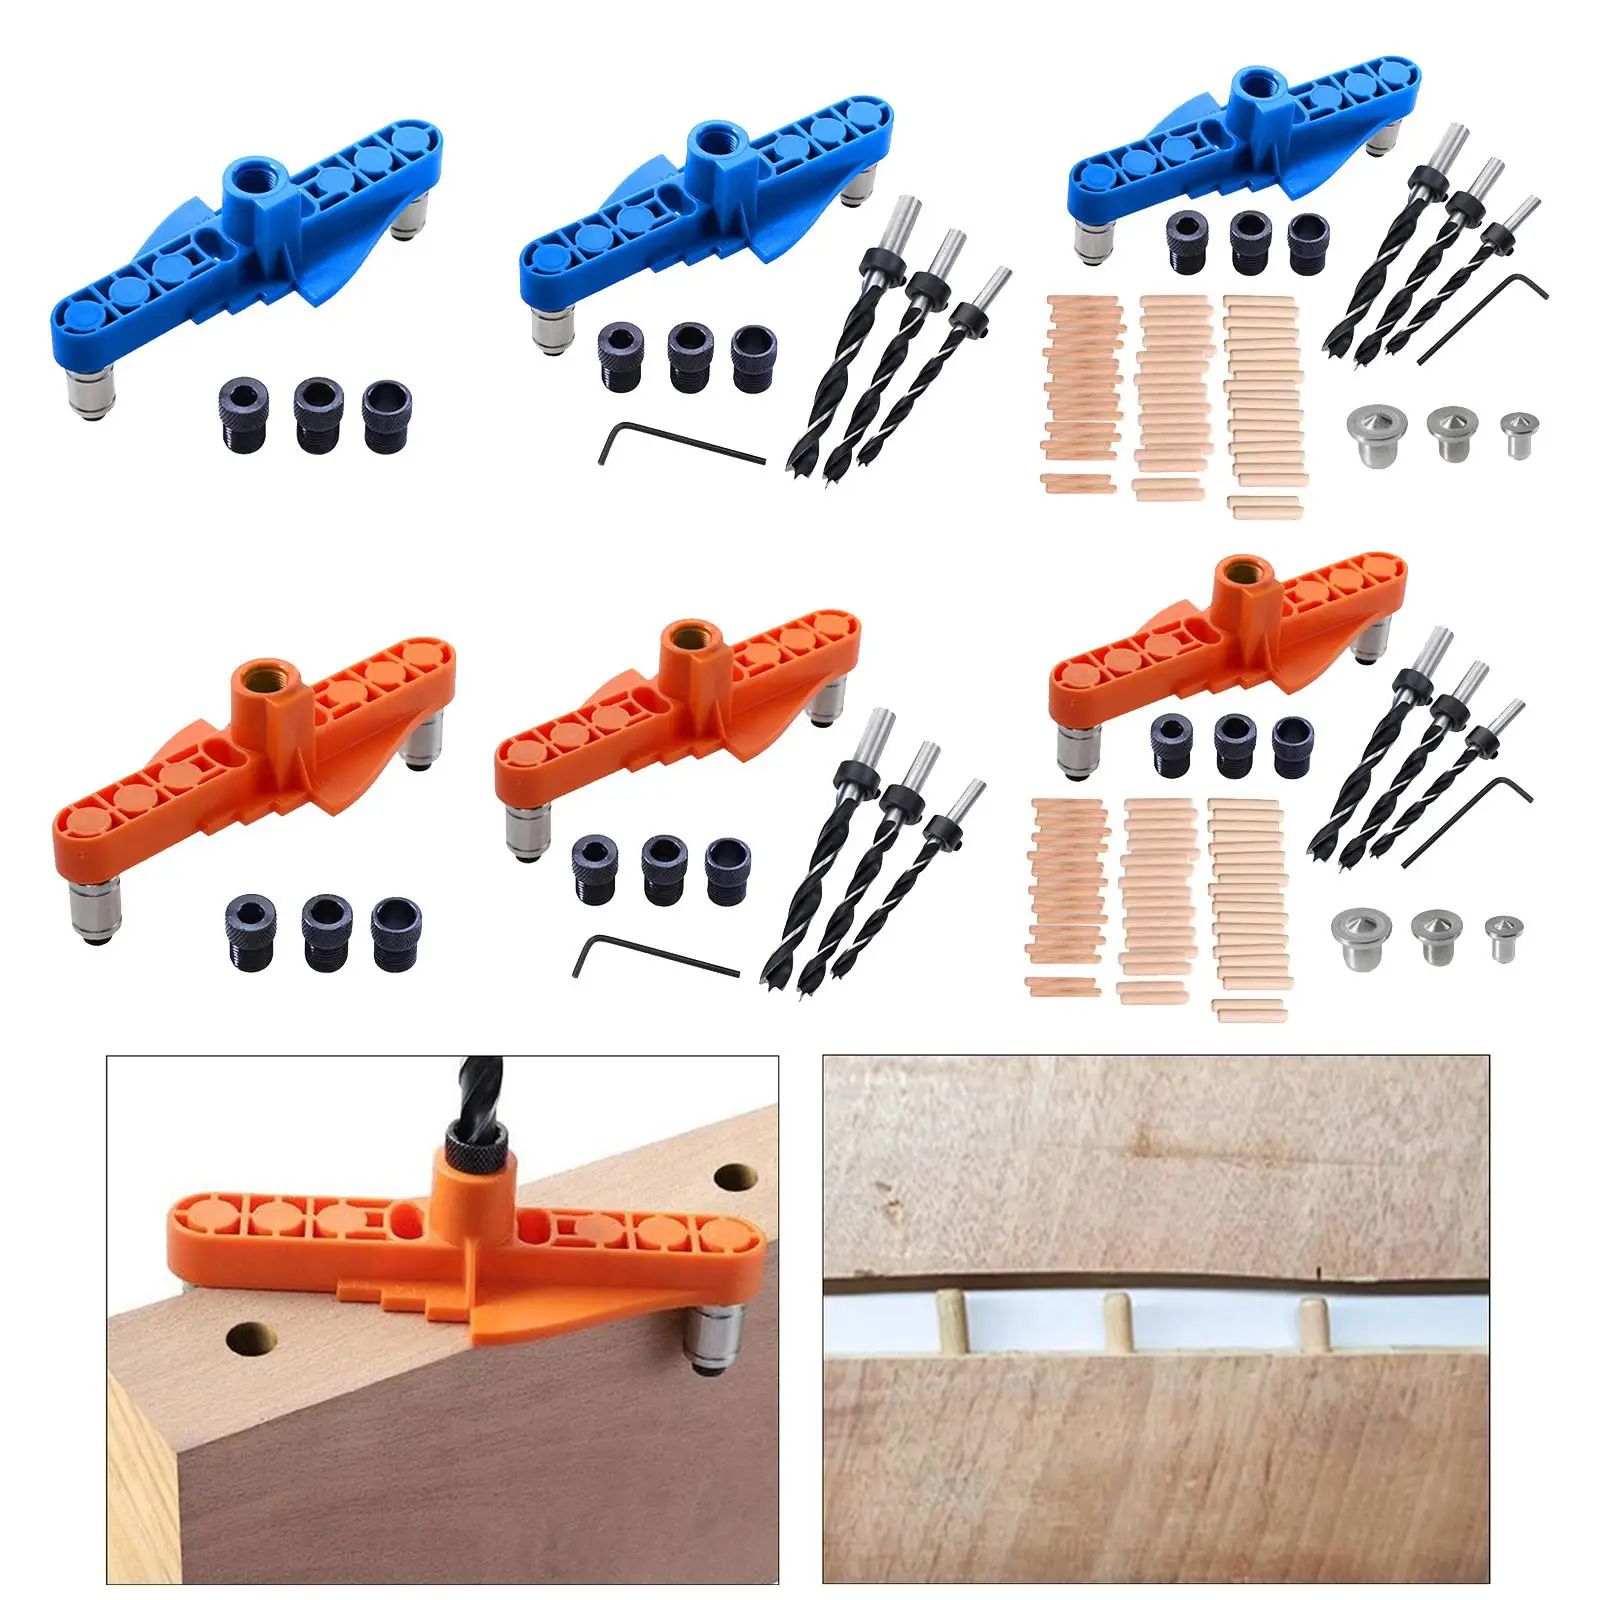 2 in 1 Hole Doweling Jig Kit Puncher Locator Positioner Precise for Joinery